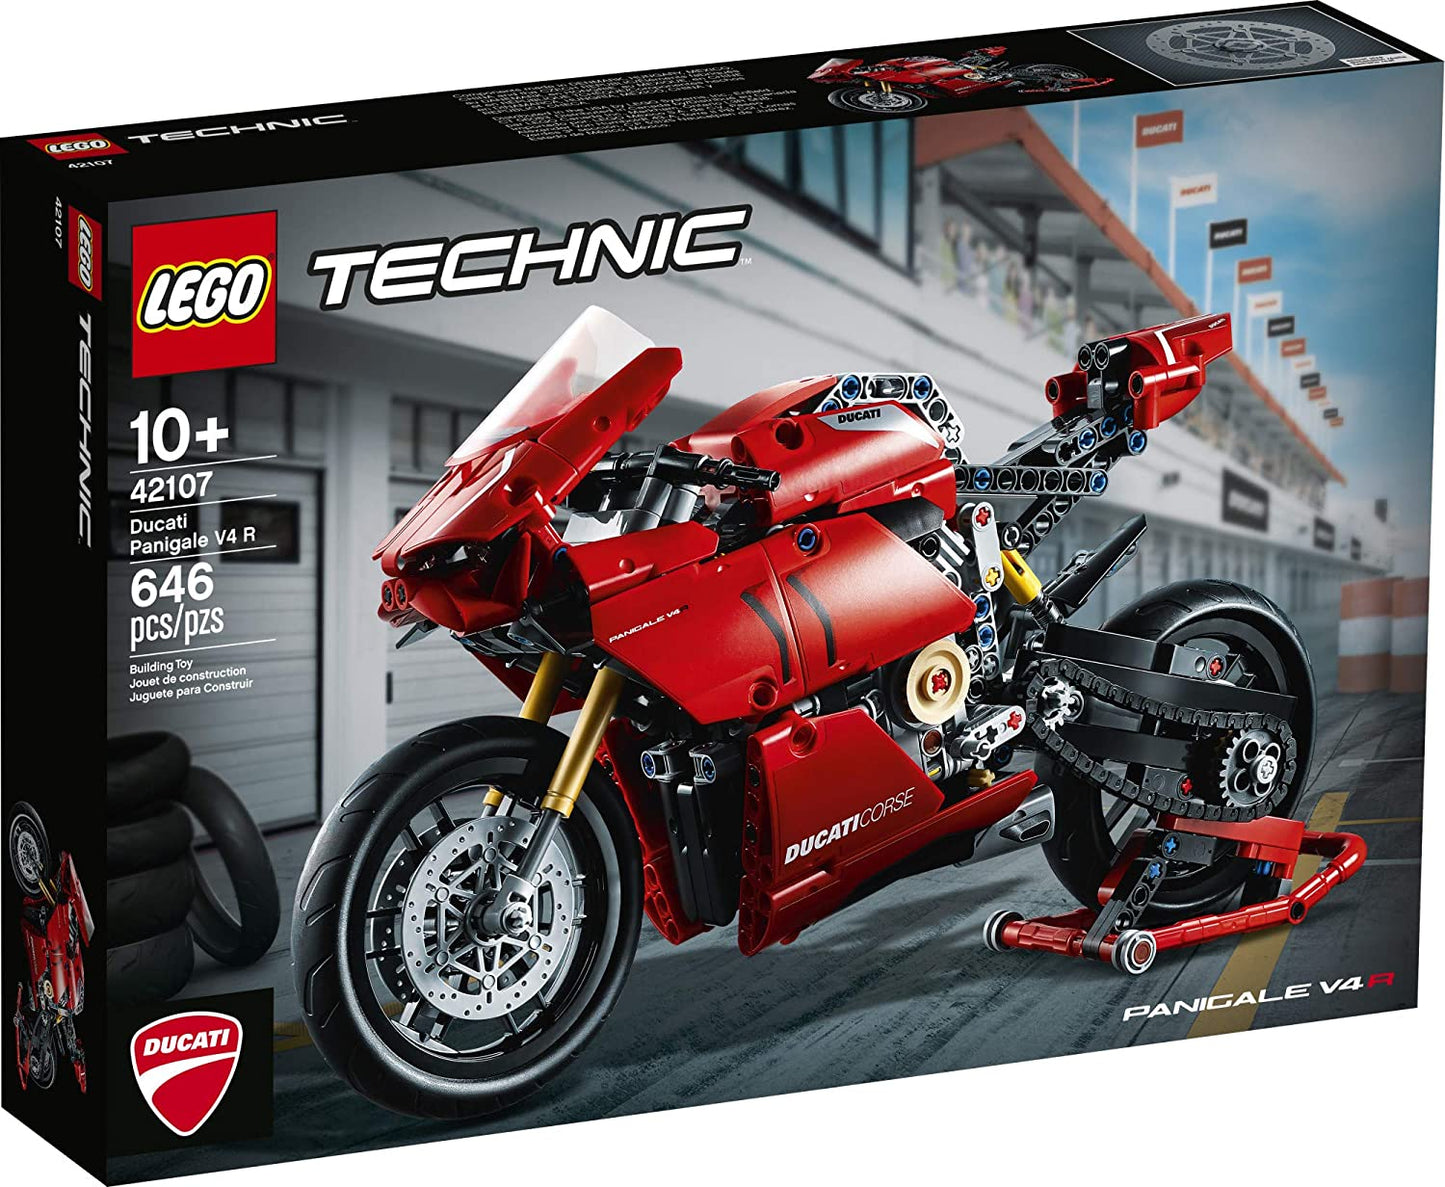 LEGO Technic Ducati Panigale V4 R 42107 Motorcycle Toy Building Kit, Build A Model Motorcycle, Featuring Gearbox and Suspension (646 Pieces),